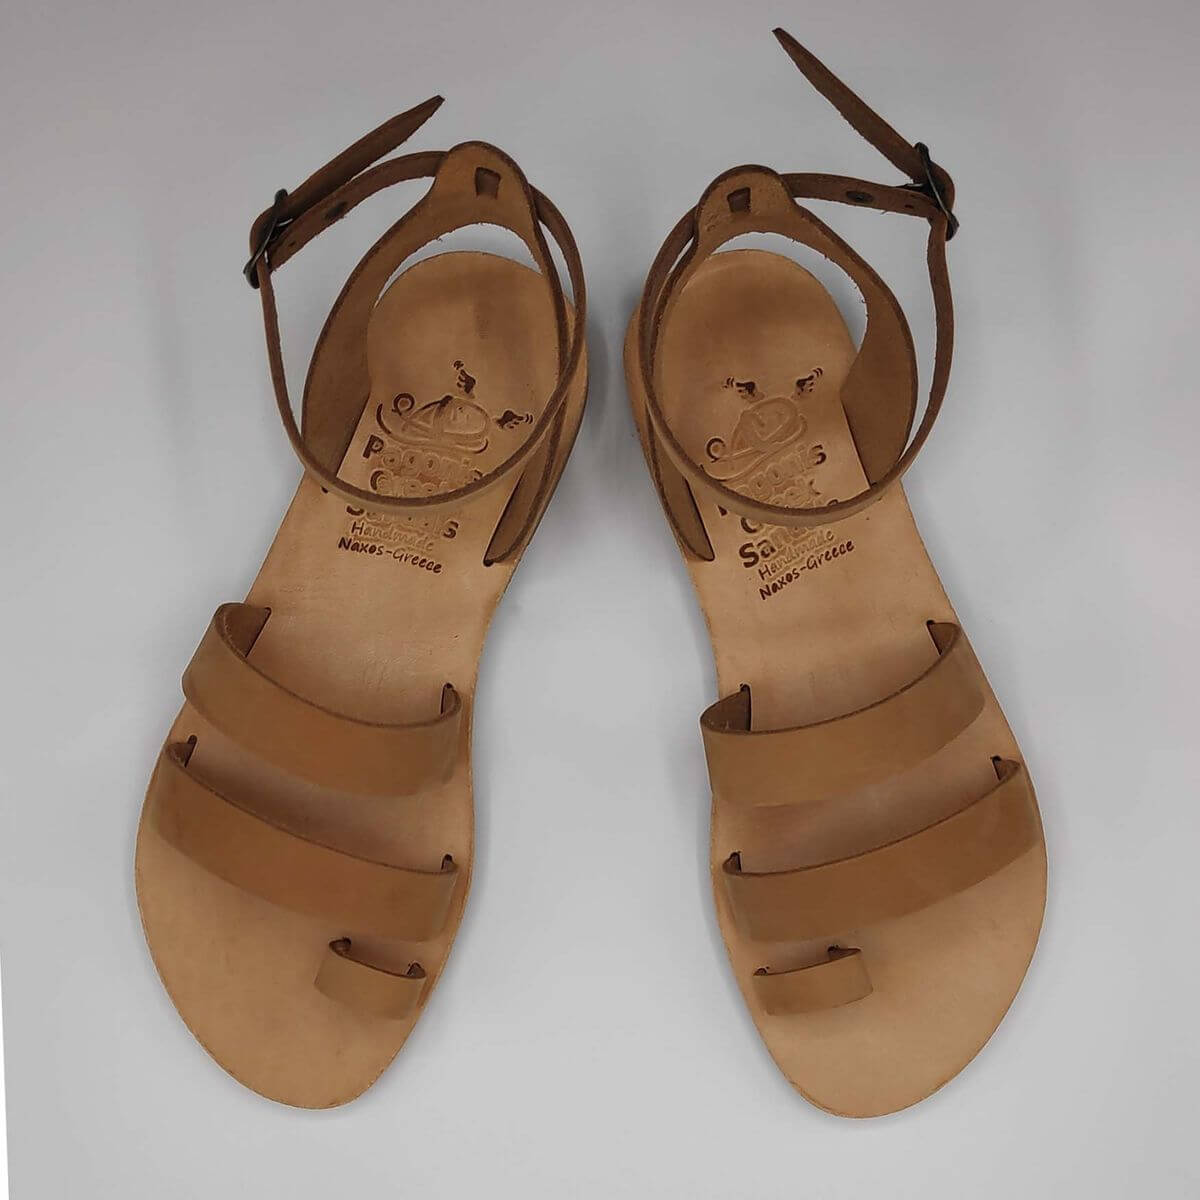 nude nubuck leather dressy sandals with two straps, toe ring and high ankle strap, top view